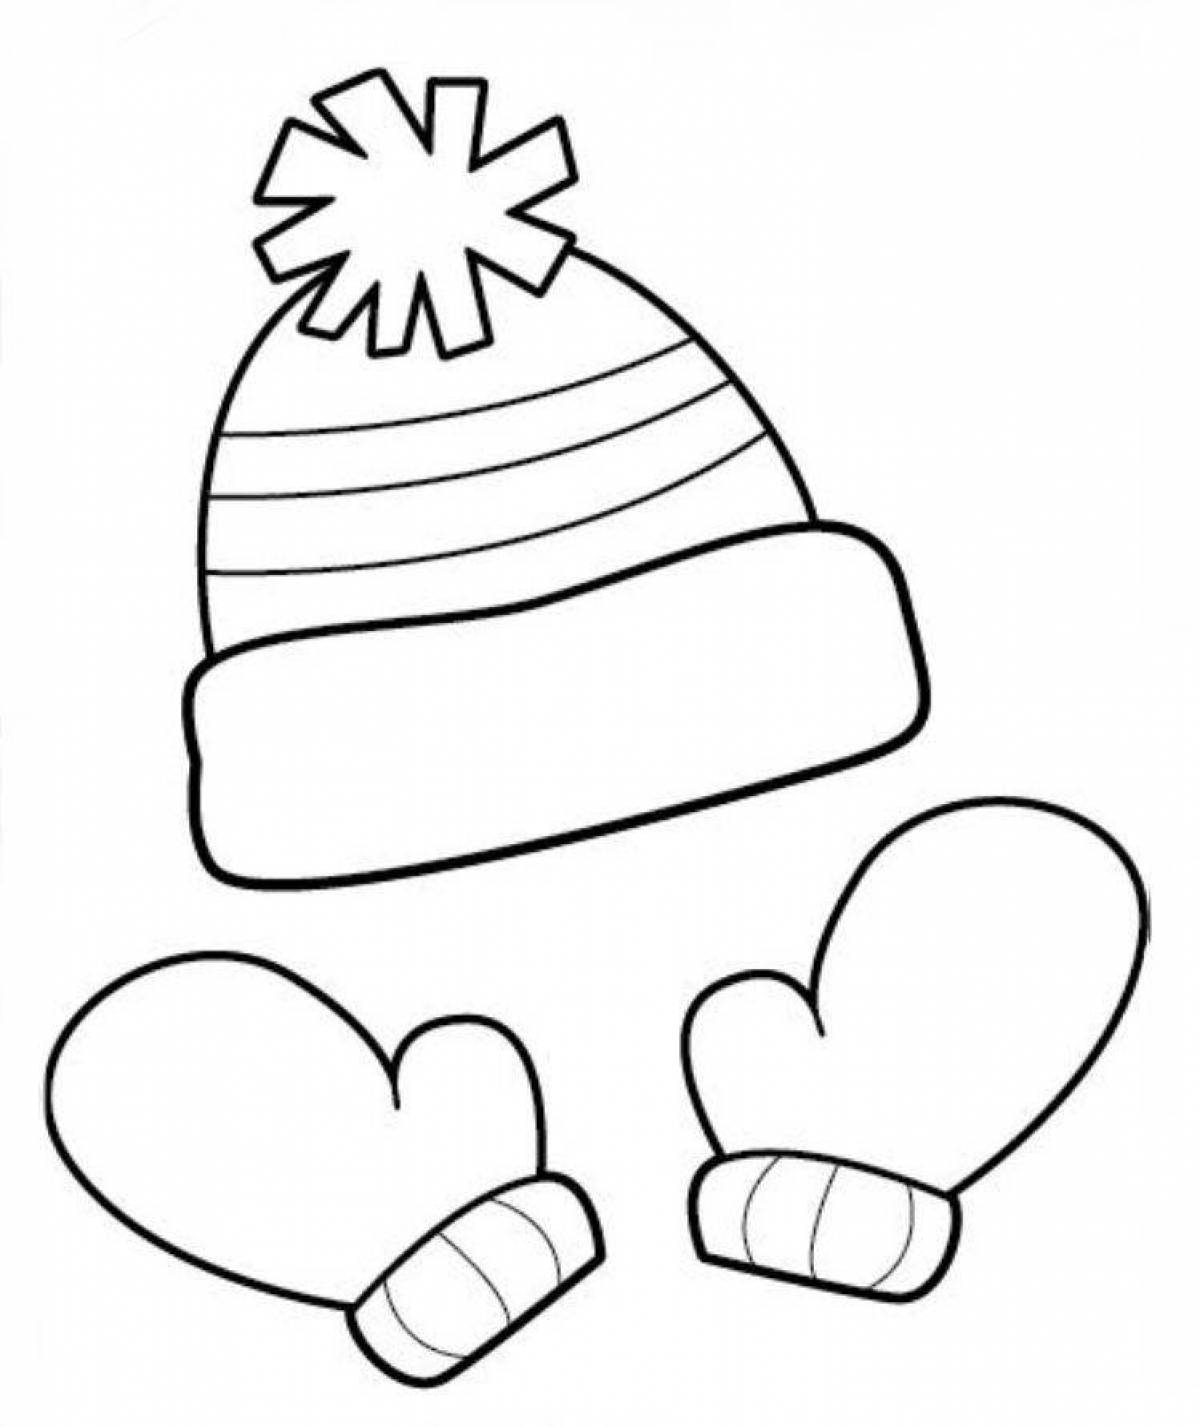 Fancy scarf and hat coloring page